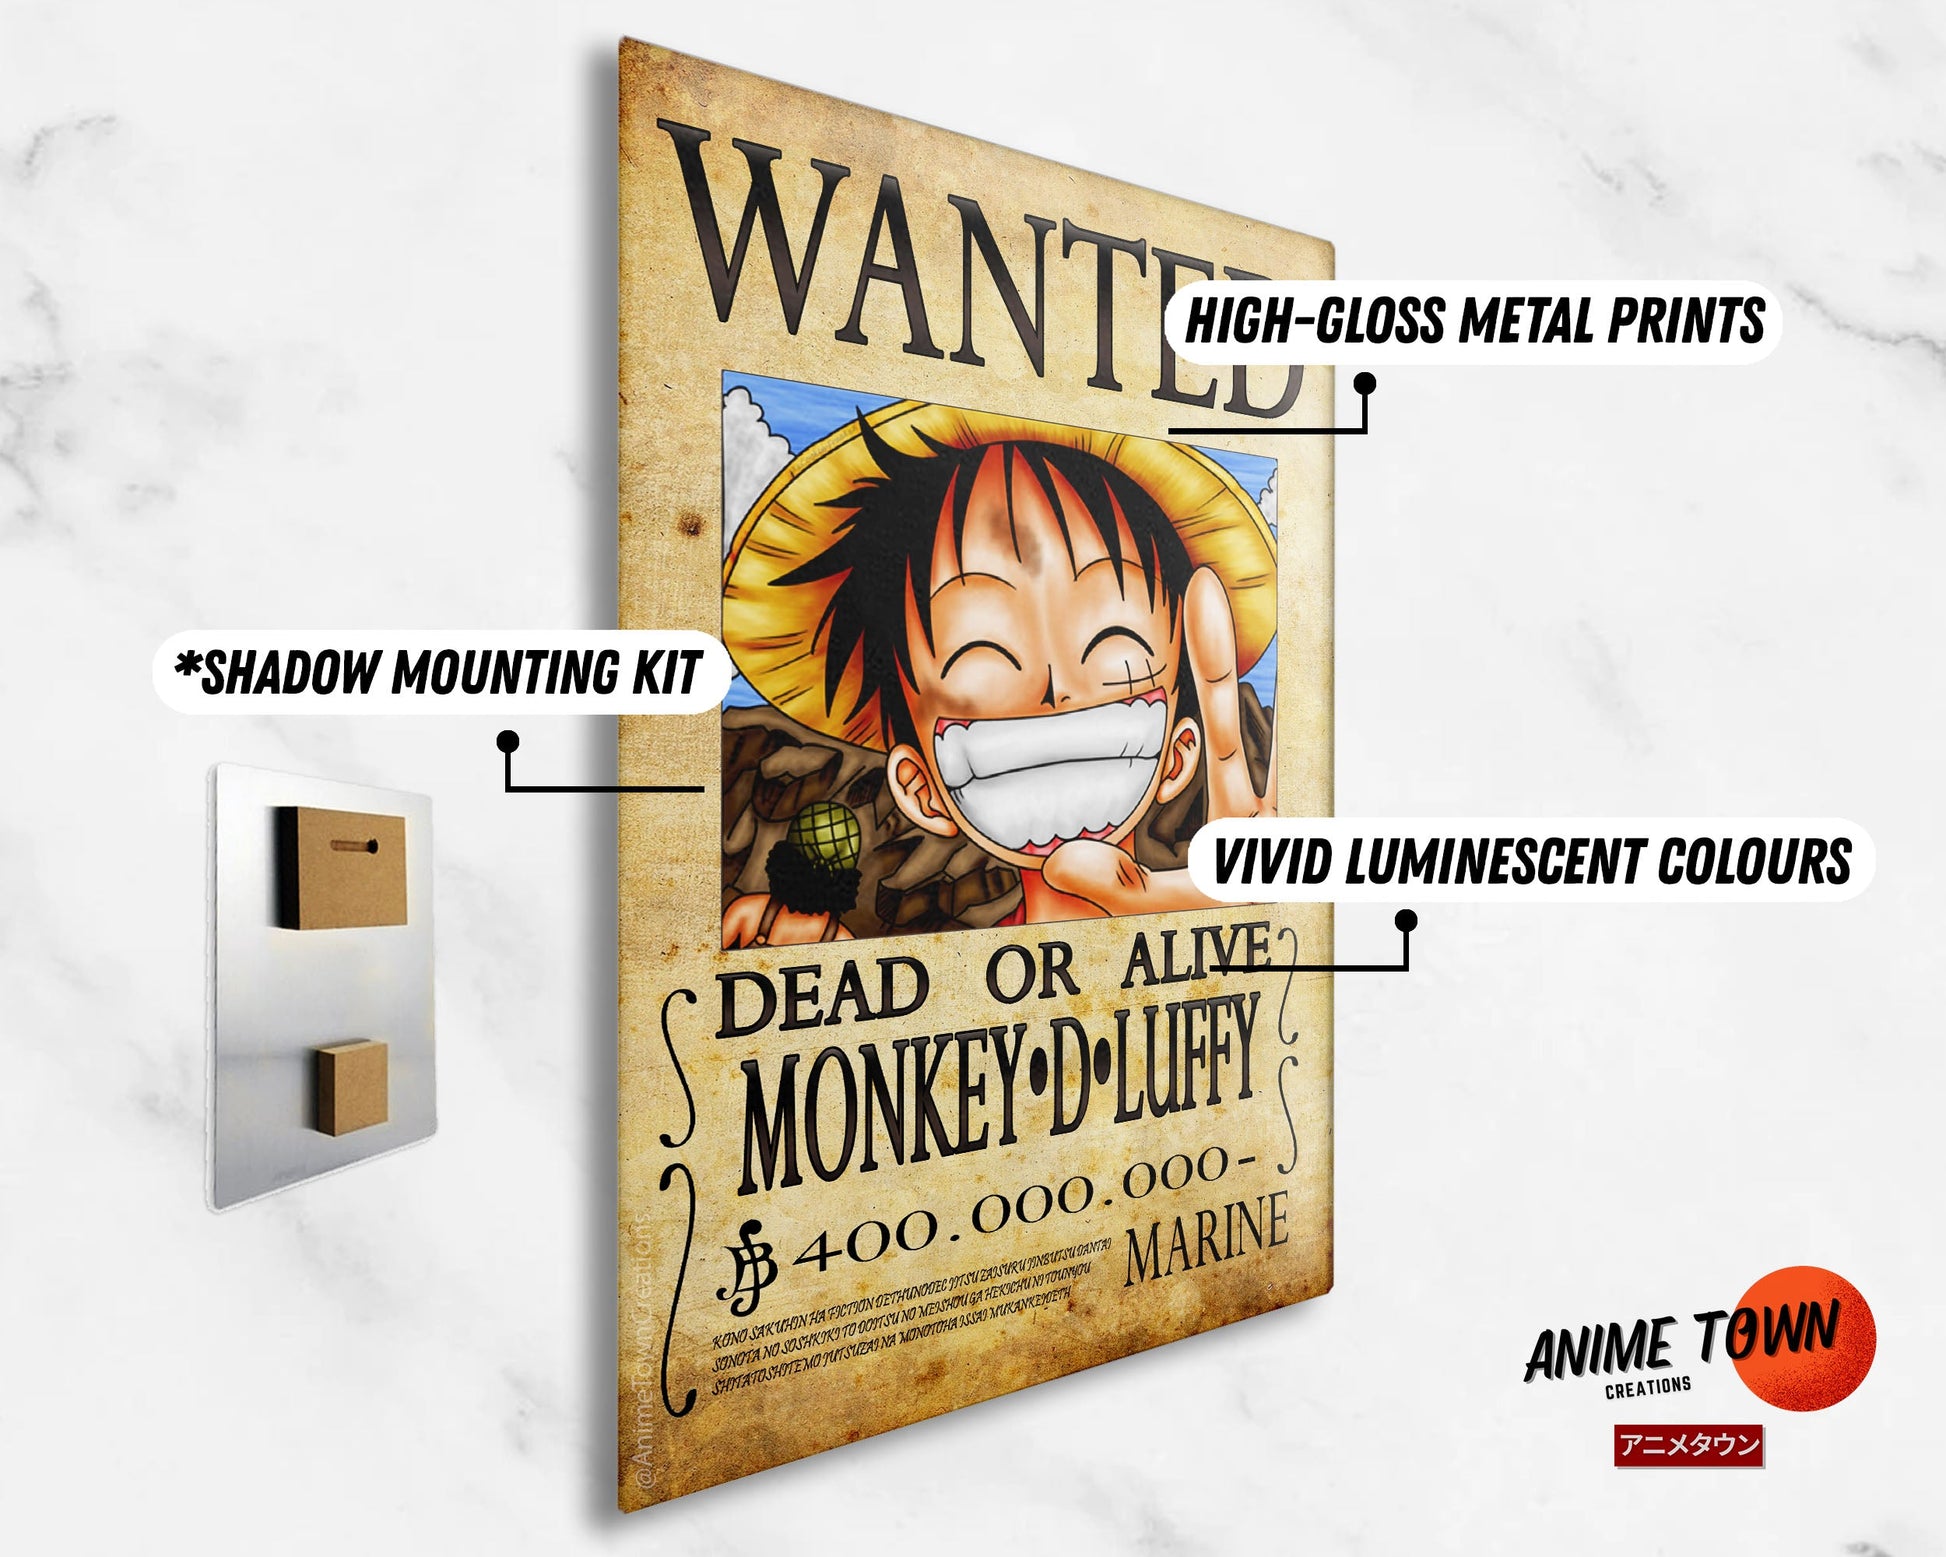 Custom One Piece Inspired Wanted Poster 